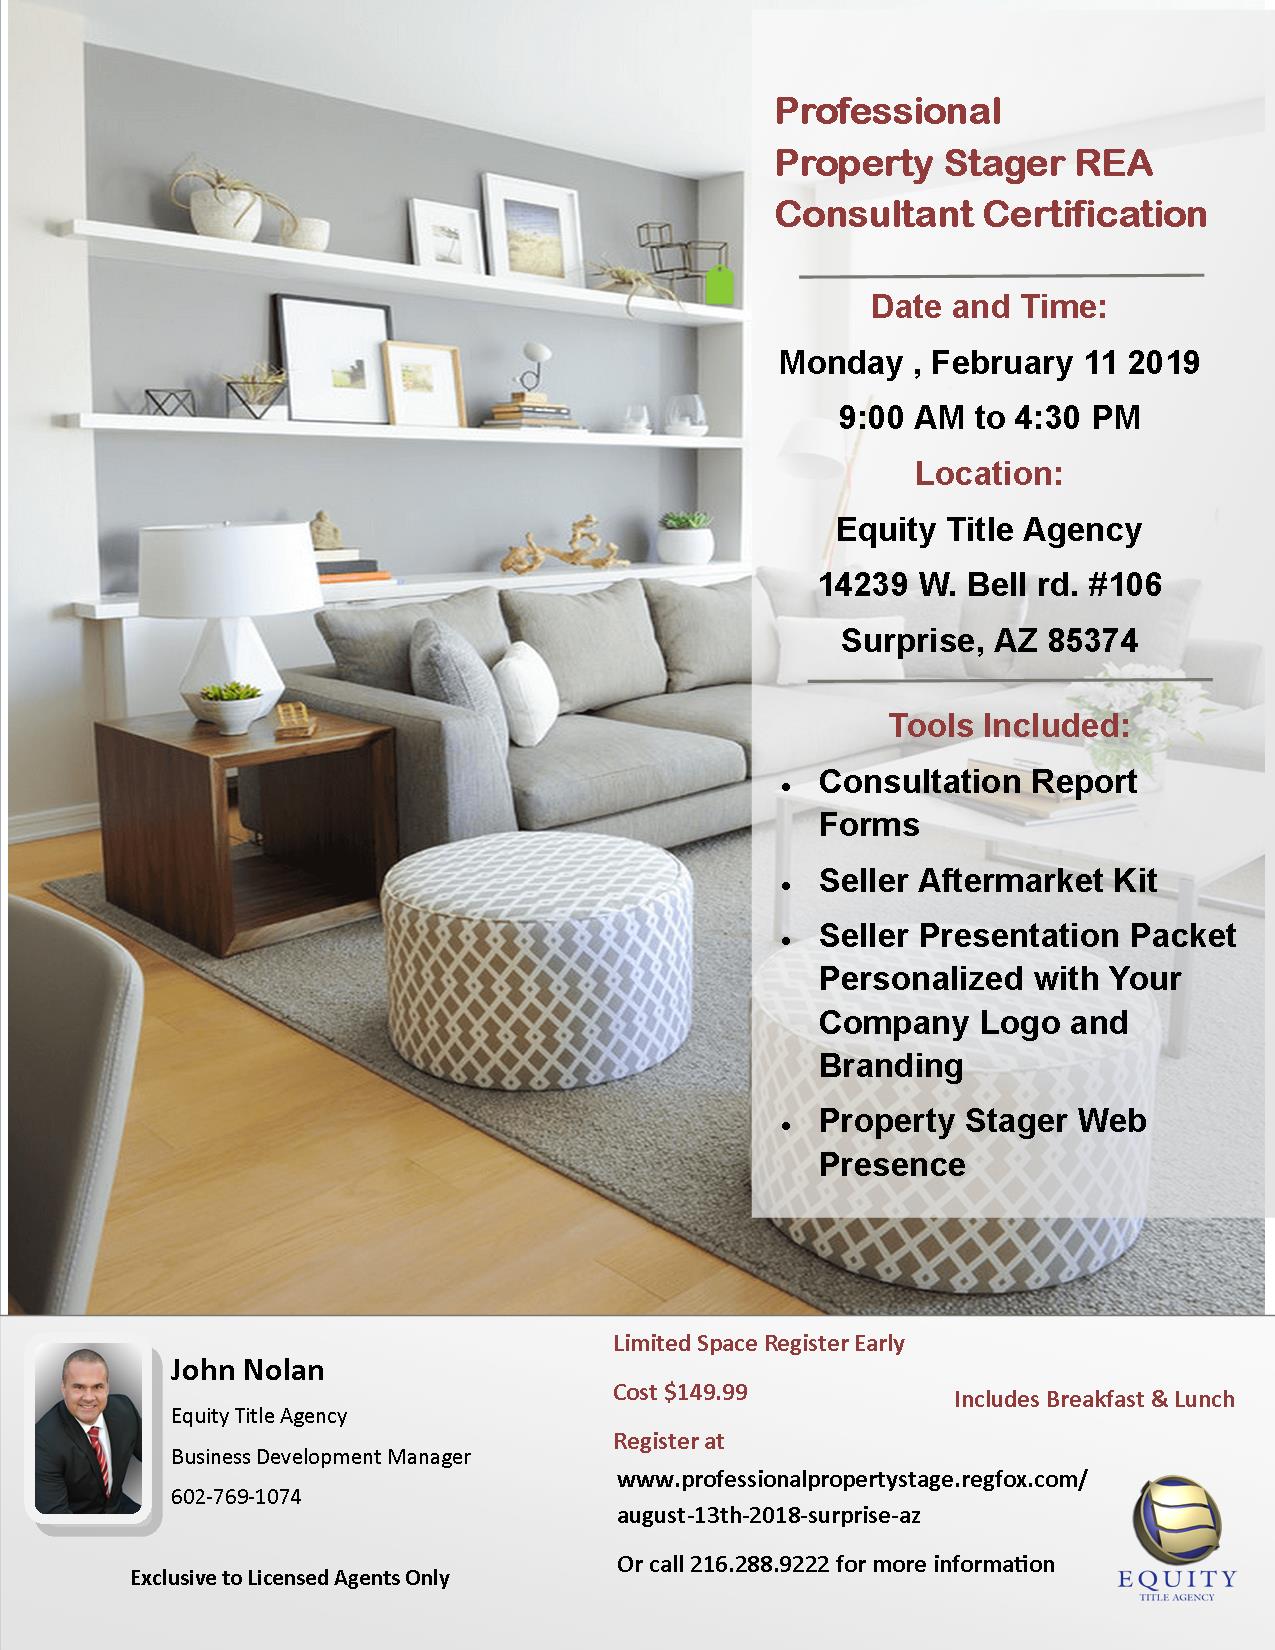 Property Staging Certificate Class